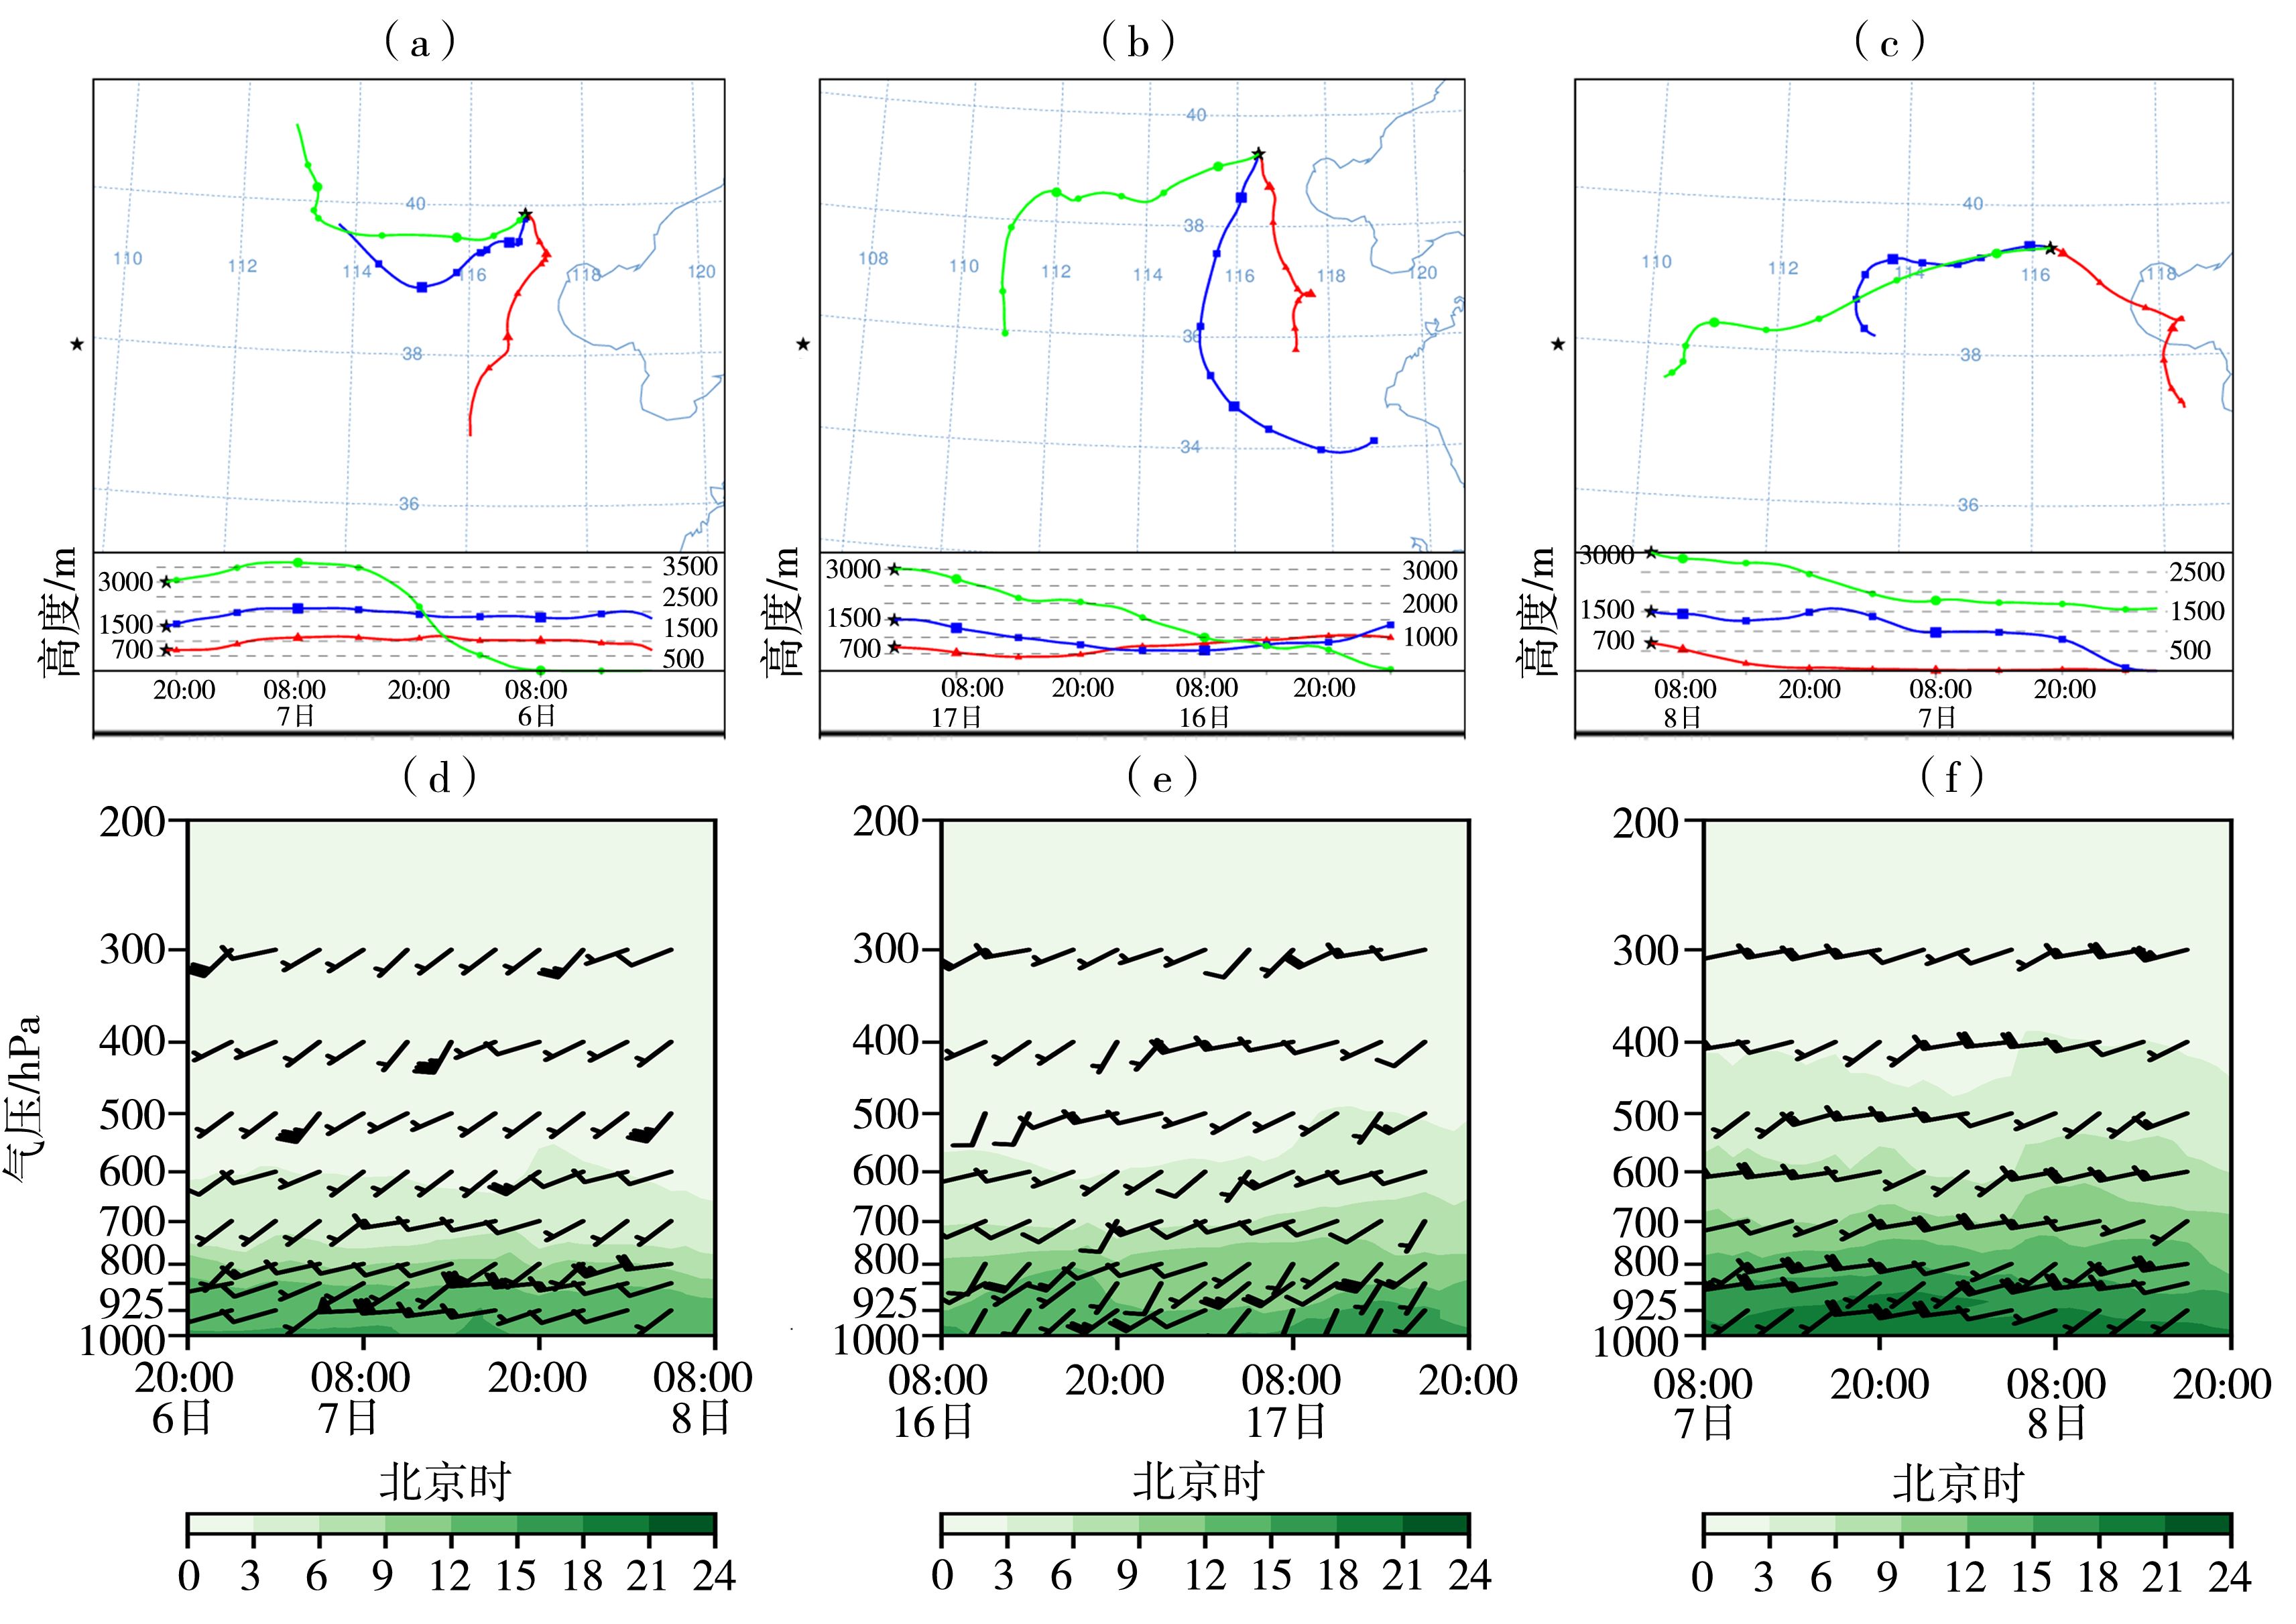 Formation conditions and characteristics of heavy precipitation with quasi-linear MCSs